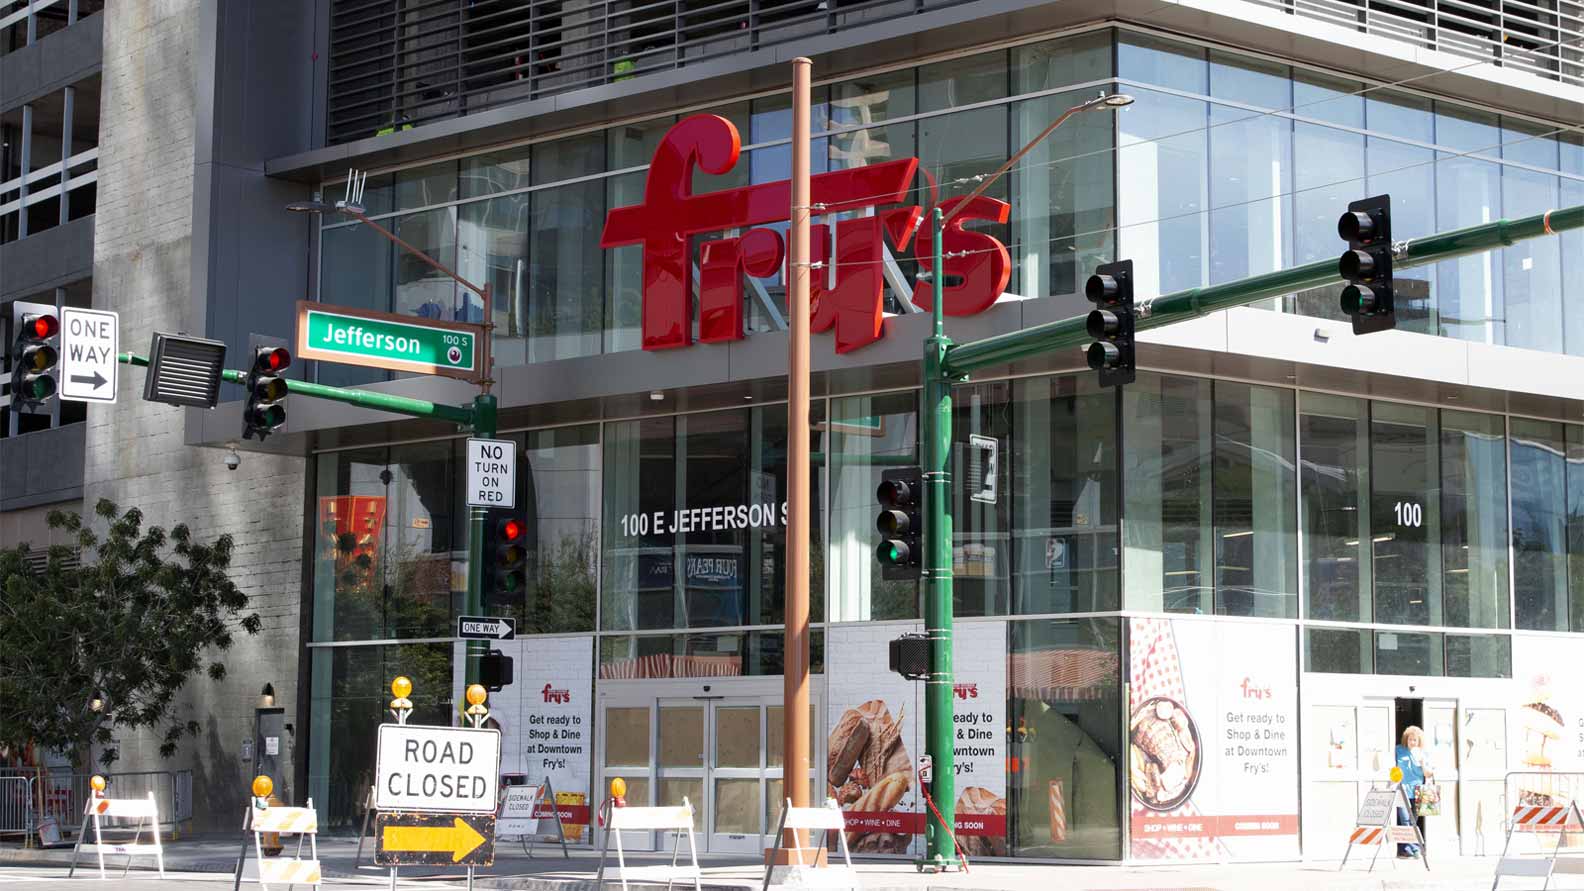 Fry’s Food Stores plans to continue investing millions in Arizona